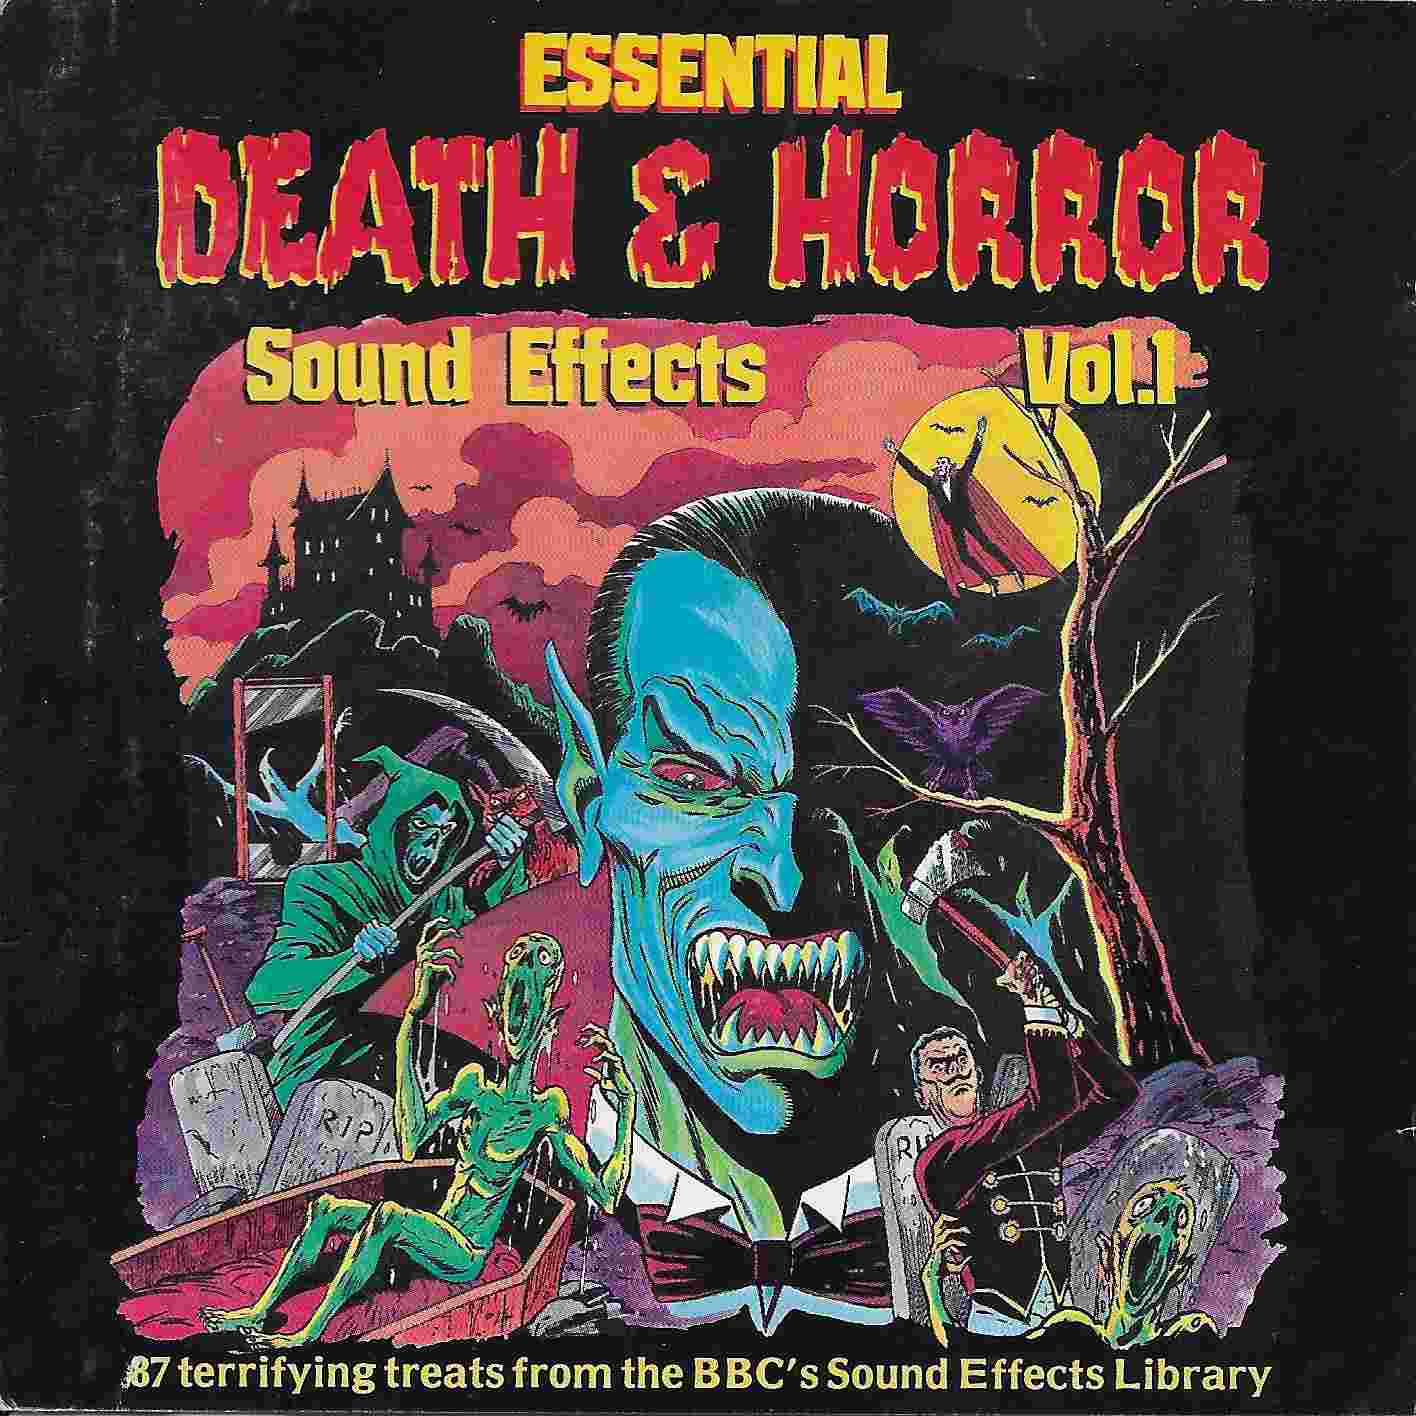 Picture of Essential death and horror - Volume 1 by artist Various from the BBC cds - Records and Tapes library